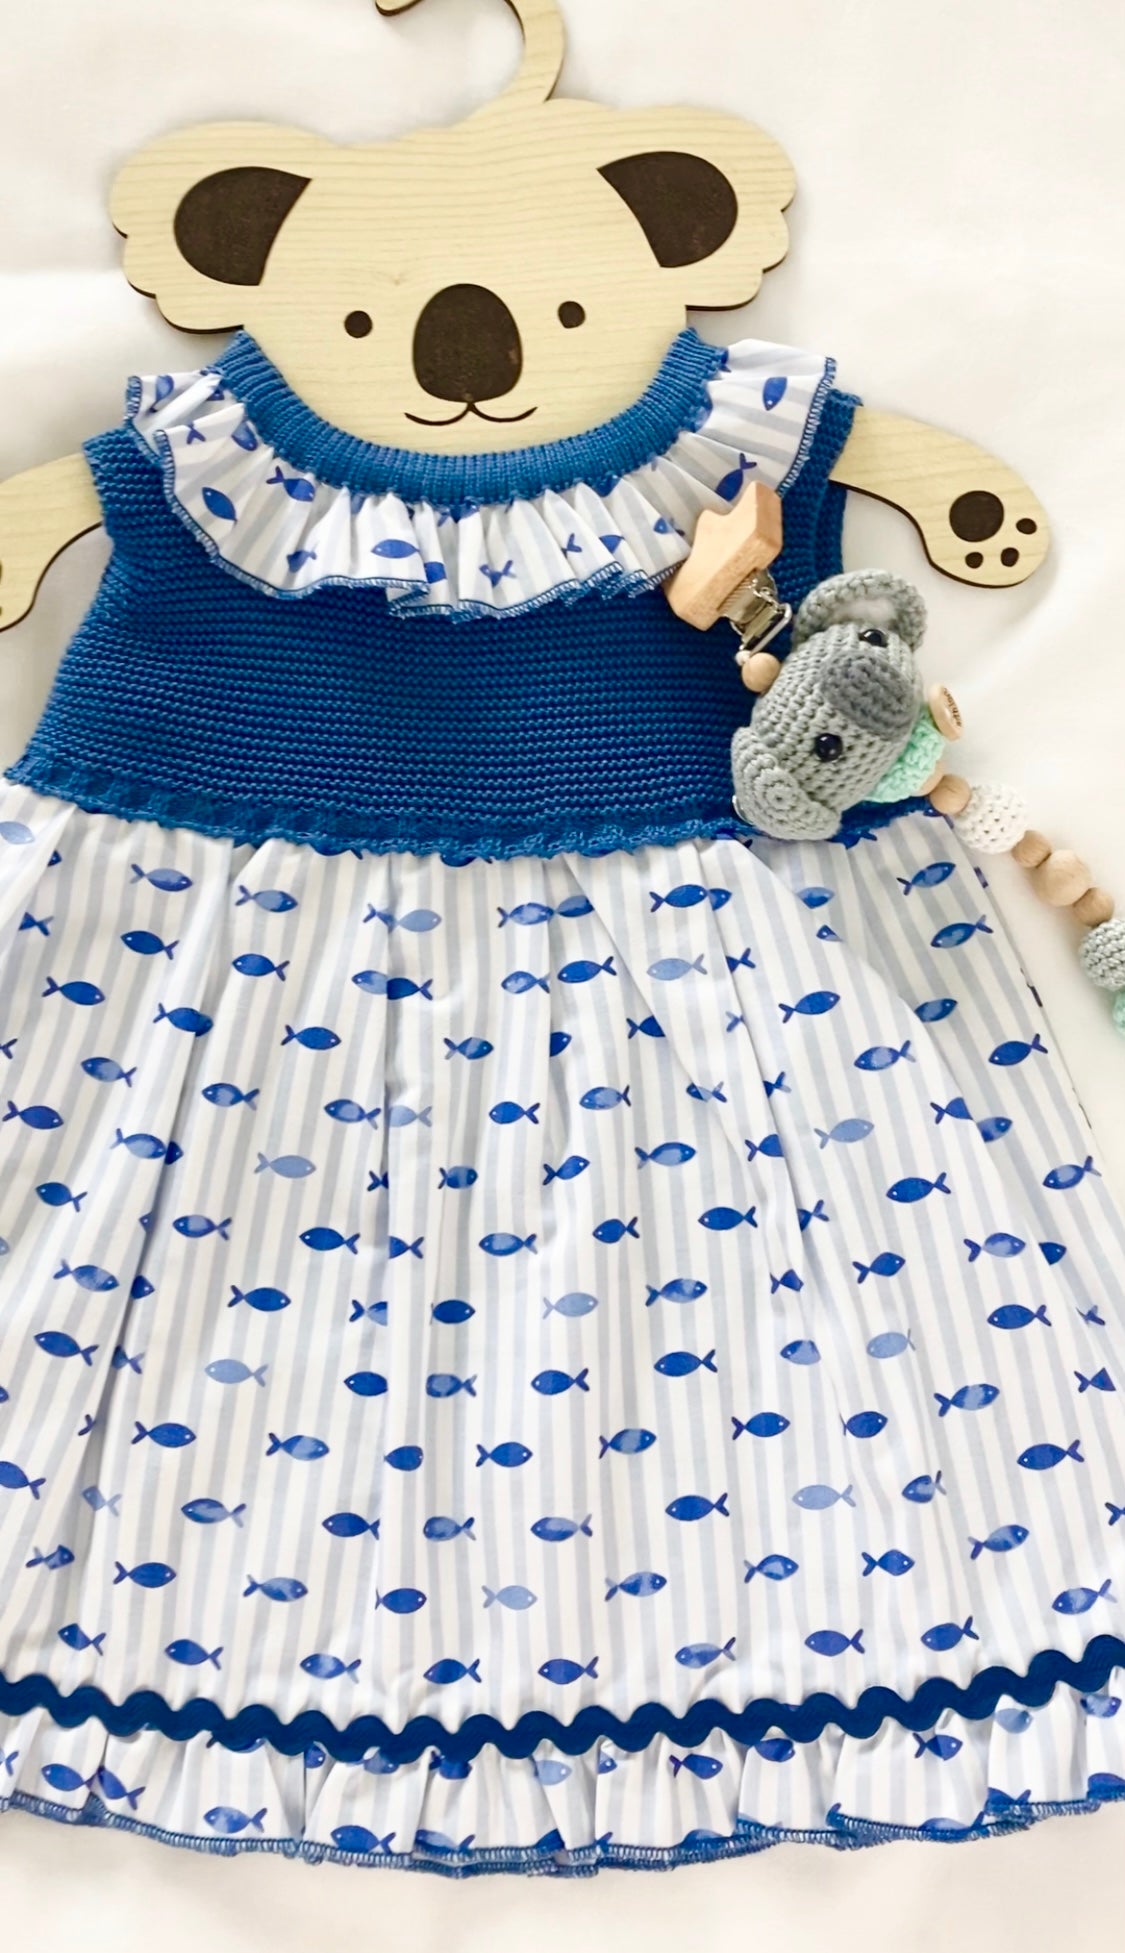 Shop High-Quality Baby Clothes and Accessories